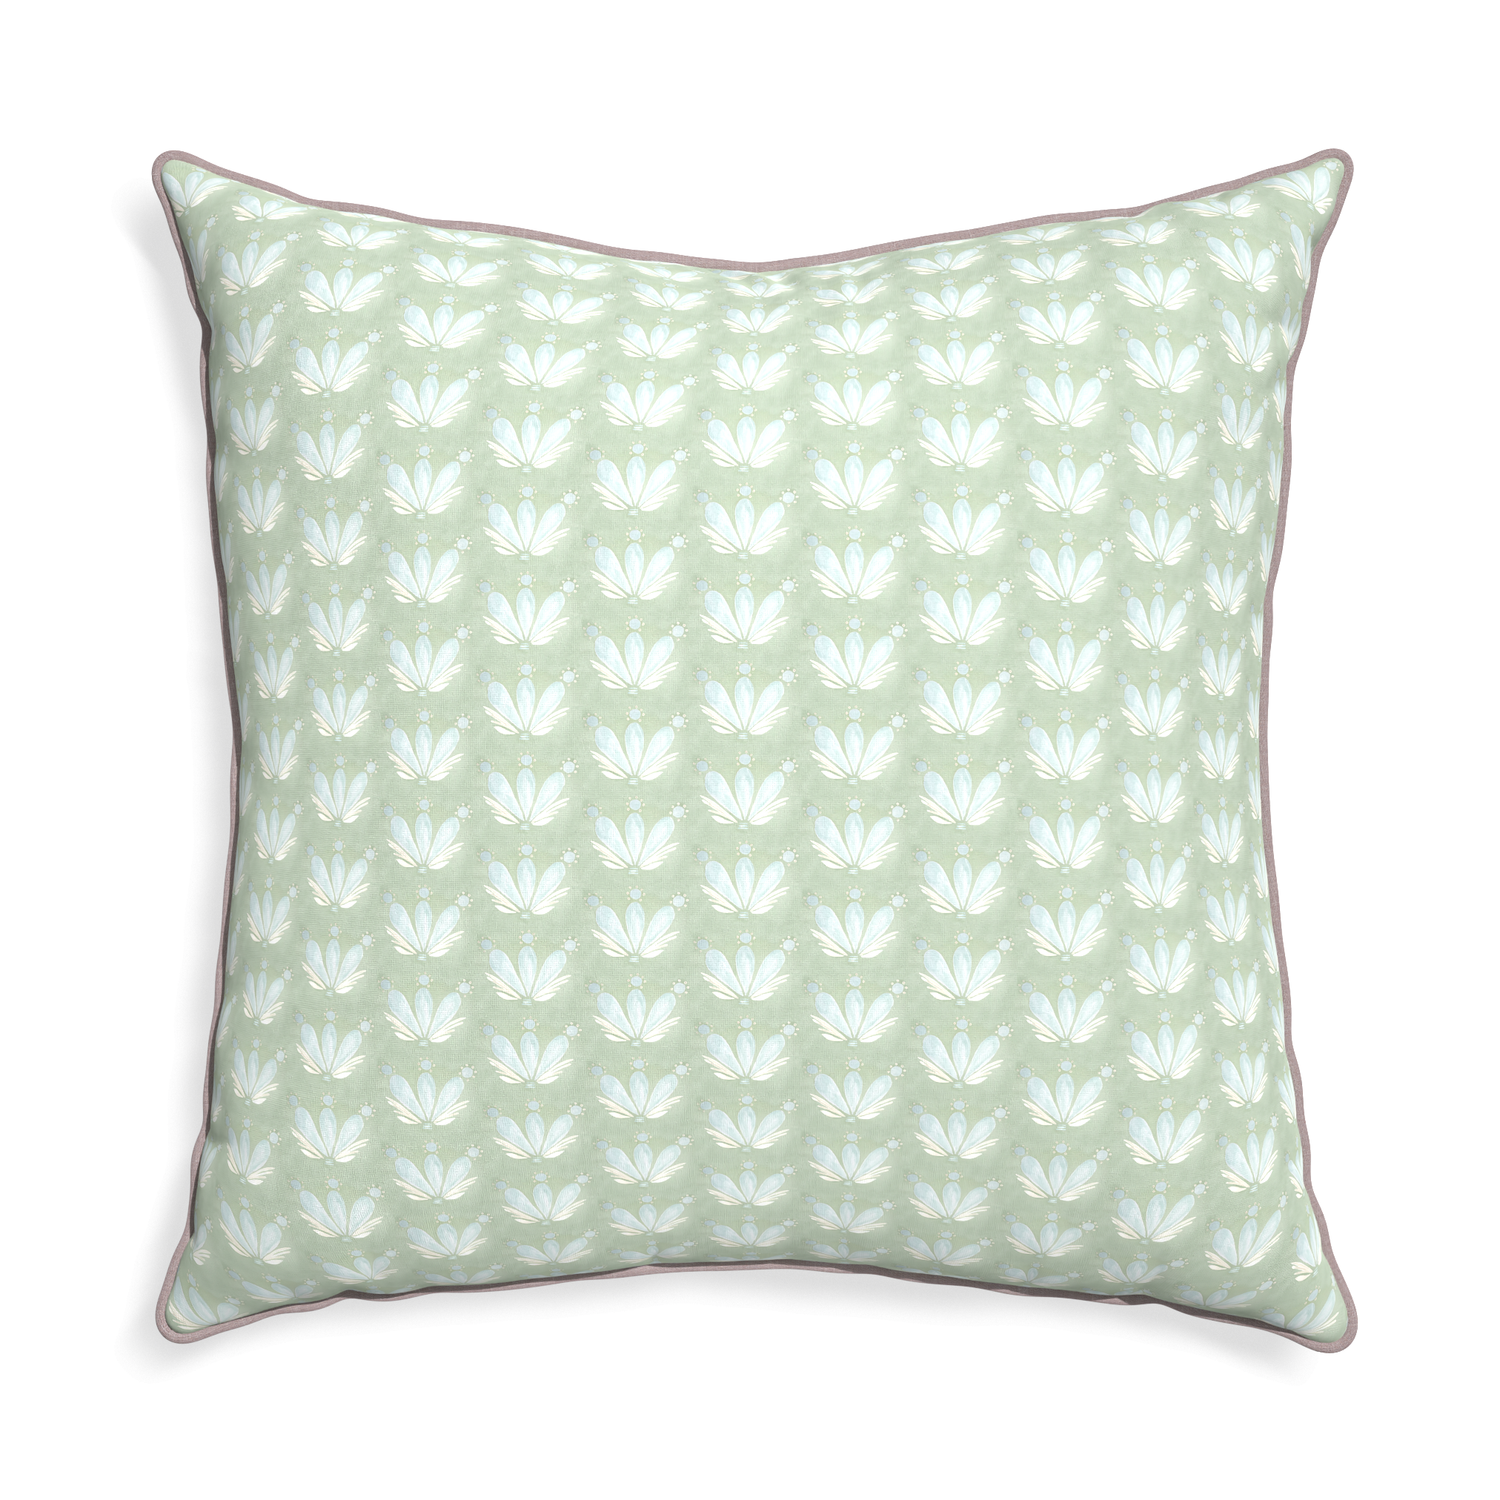 Euro-sham serena sea salt custom blue & green floral drop repeatpillow with orchid piping on white background